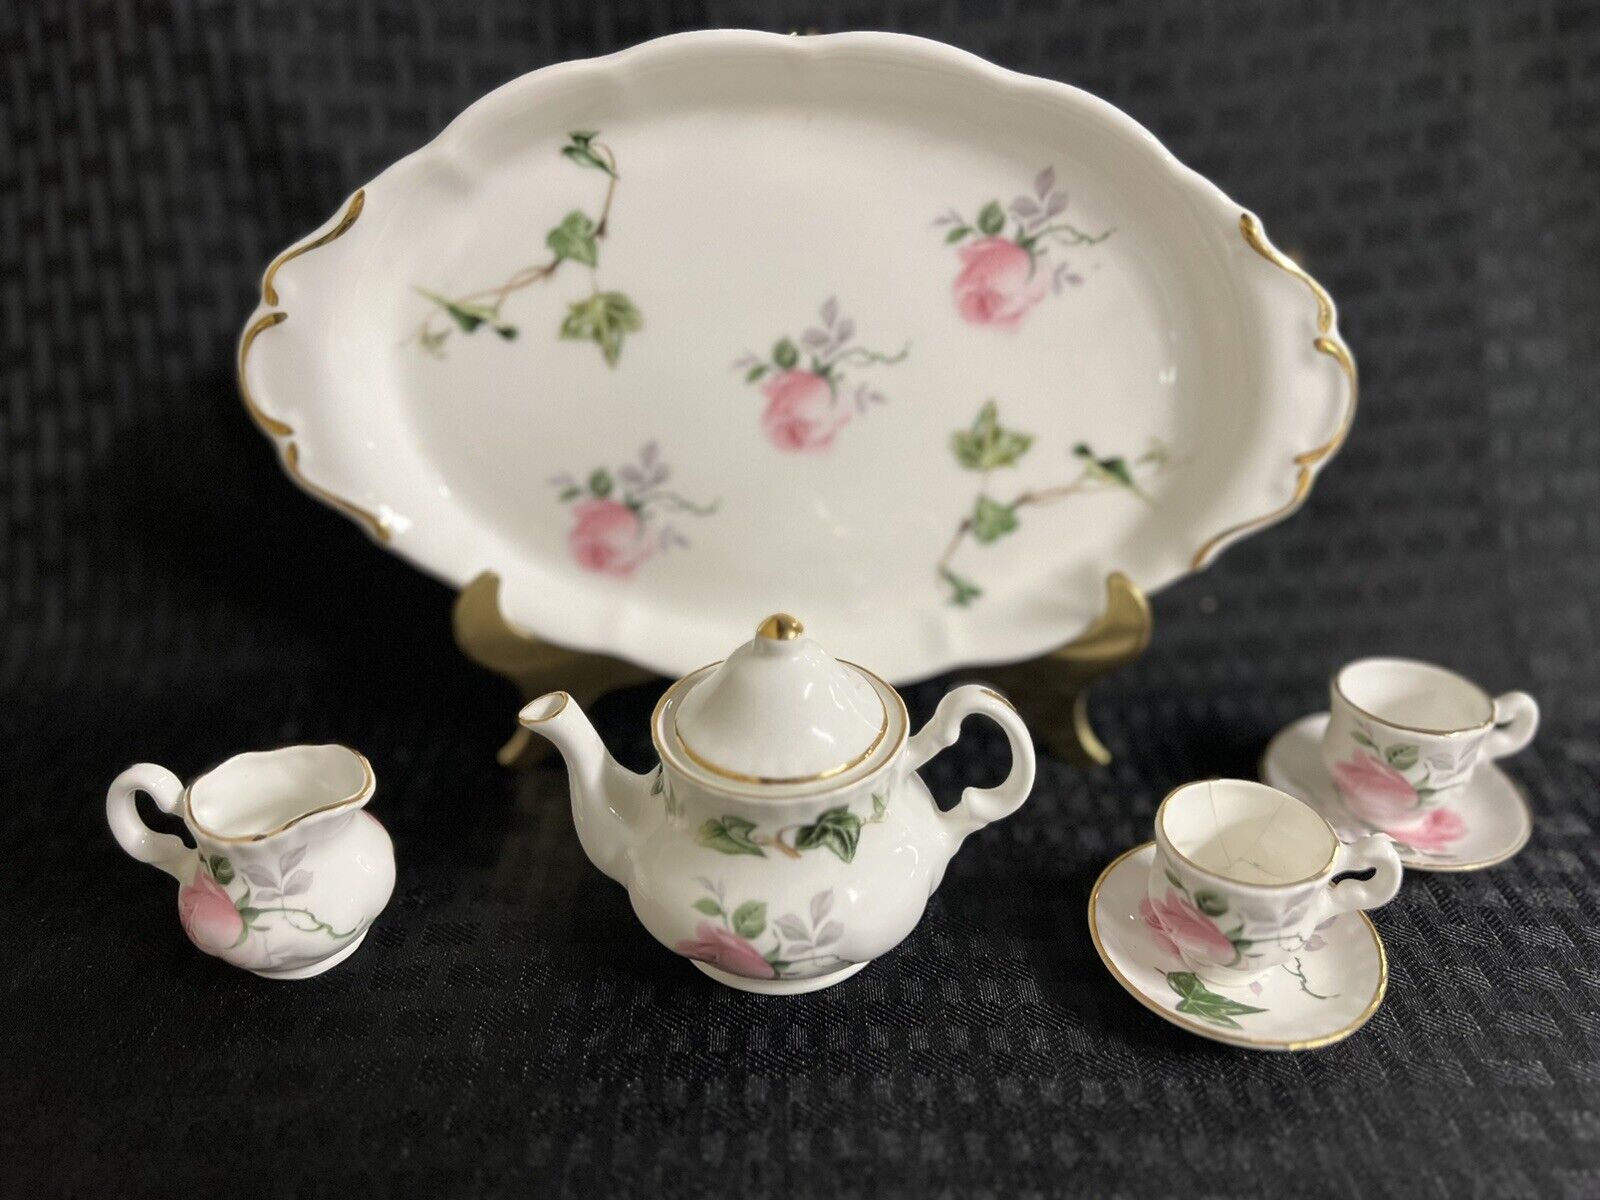 VINTAGE ALLYN NELSON MINATURE TEA SET FOR TWO FINE BONE CHINA ~ Made In England